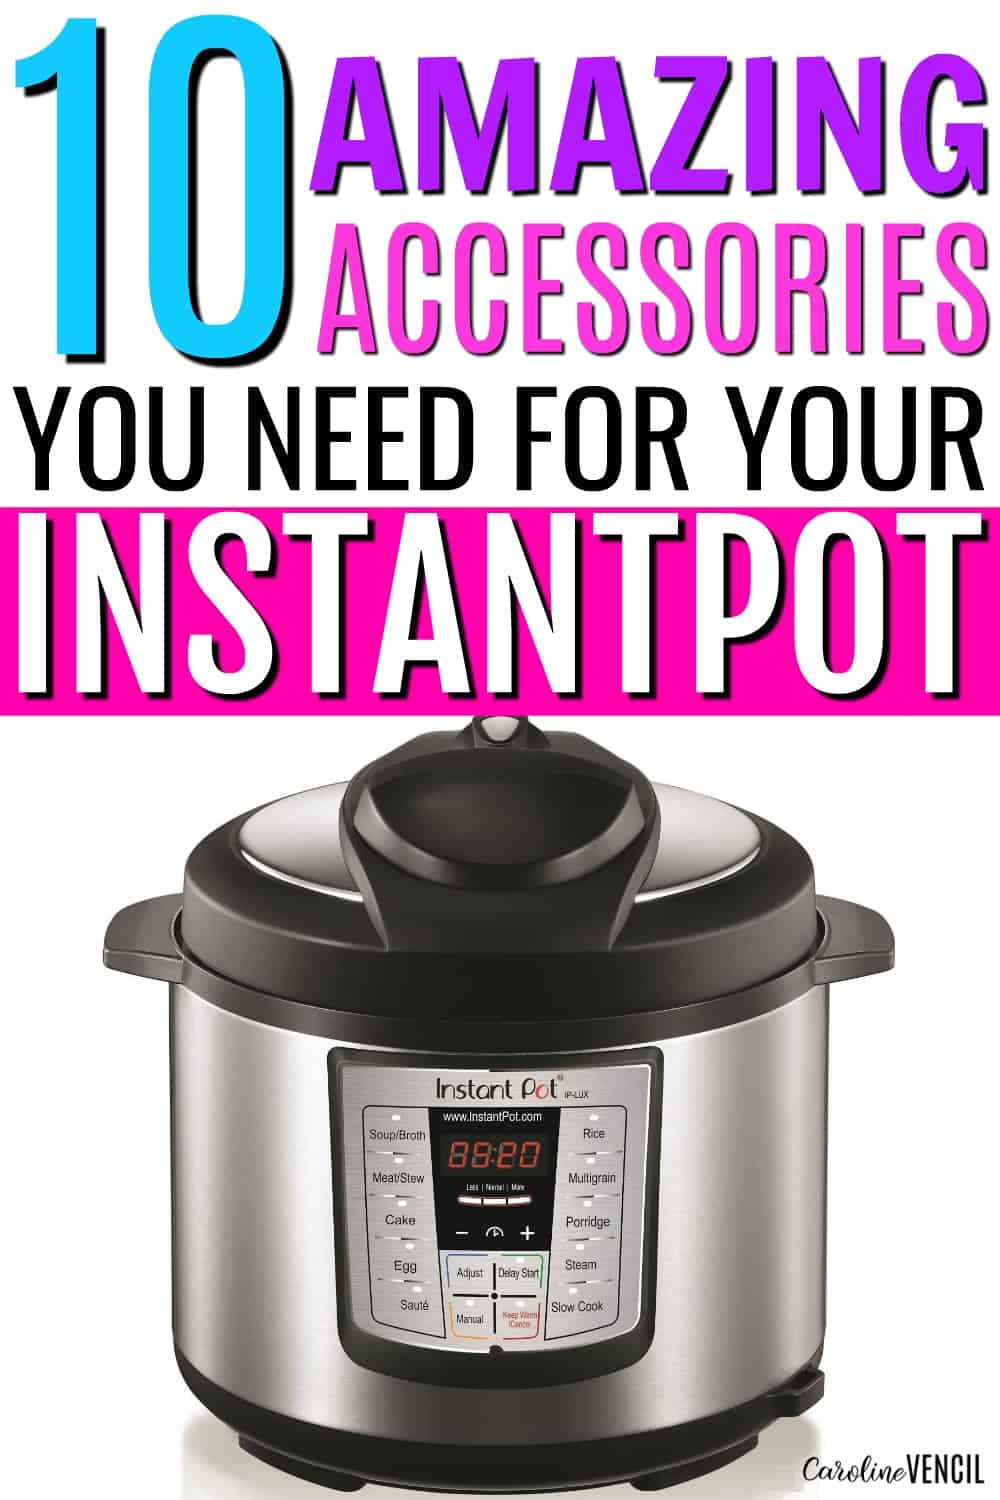 https://www.carolinevencil.com/wp-content/uploads/2018/04/10-Amazing-Accessories-you-need-for-your-InstantPot.jpg